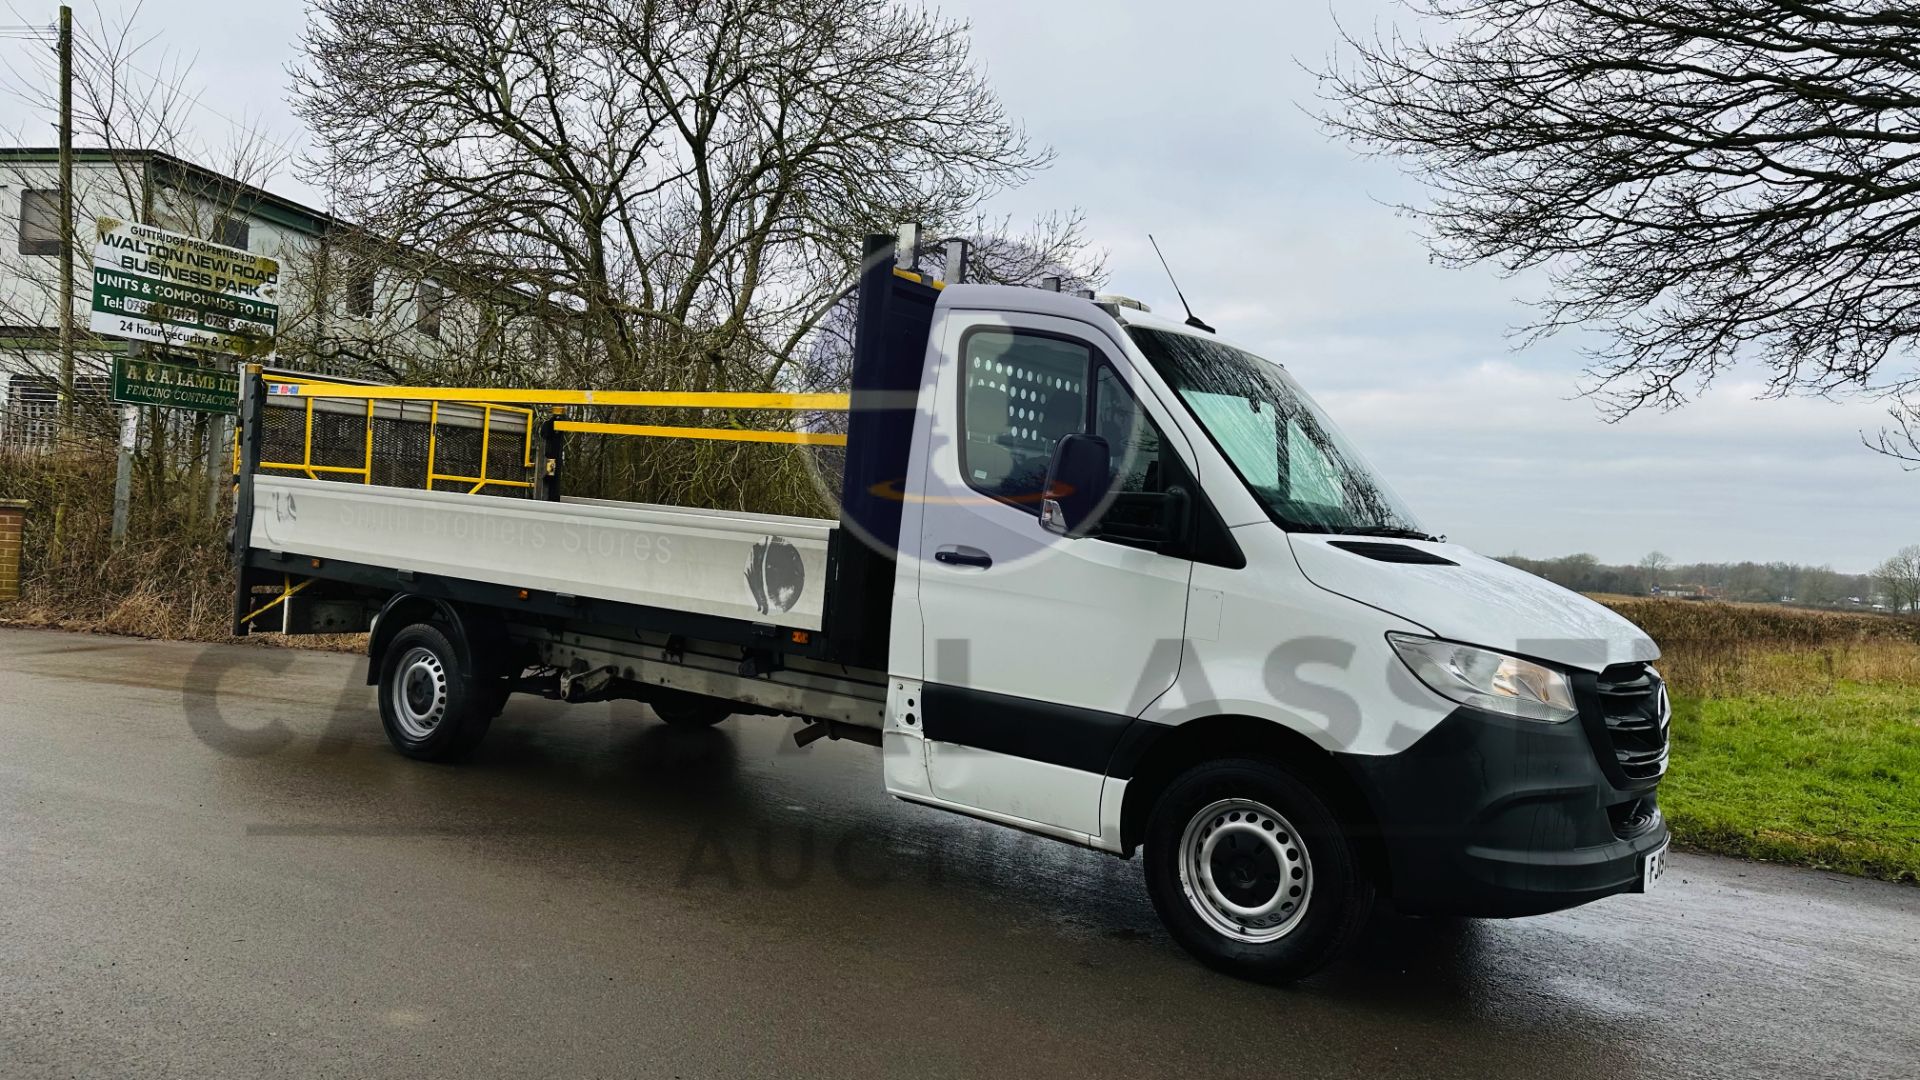 MERCEDES-BENZ SPRINTER 314 CDI *LWB - DROPSIDE* (2019 - EURO 6) AUTOMATIC *TAIL-LIFT* (3500 KG) - Image 2 of 40